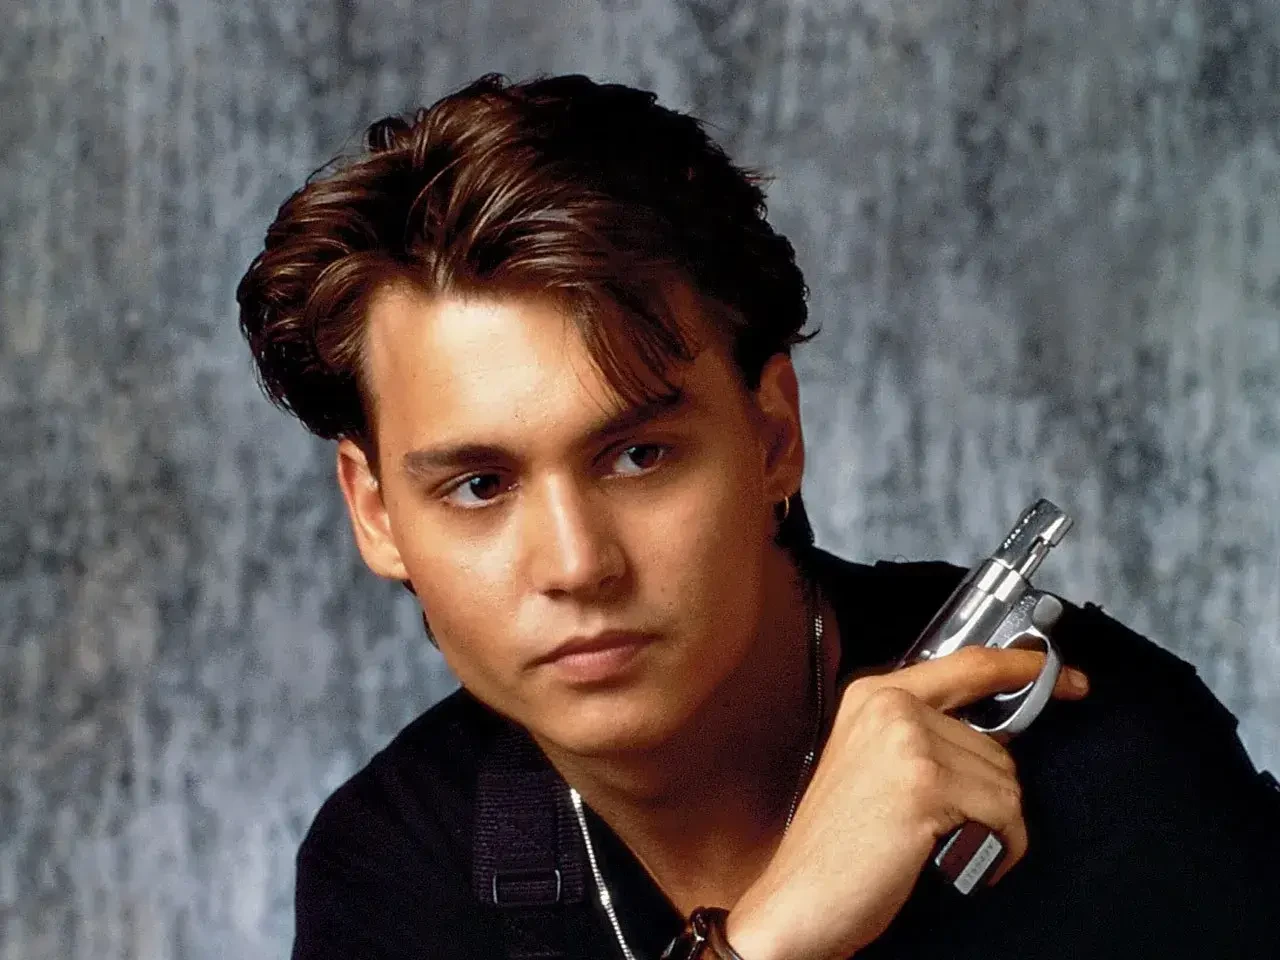 Young Johnny Depp in a still from 21 Jump Street